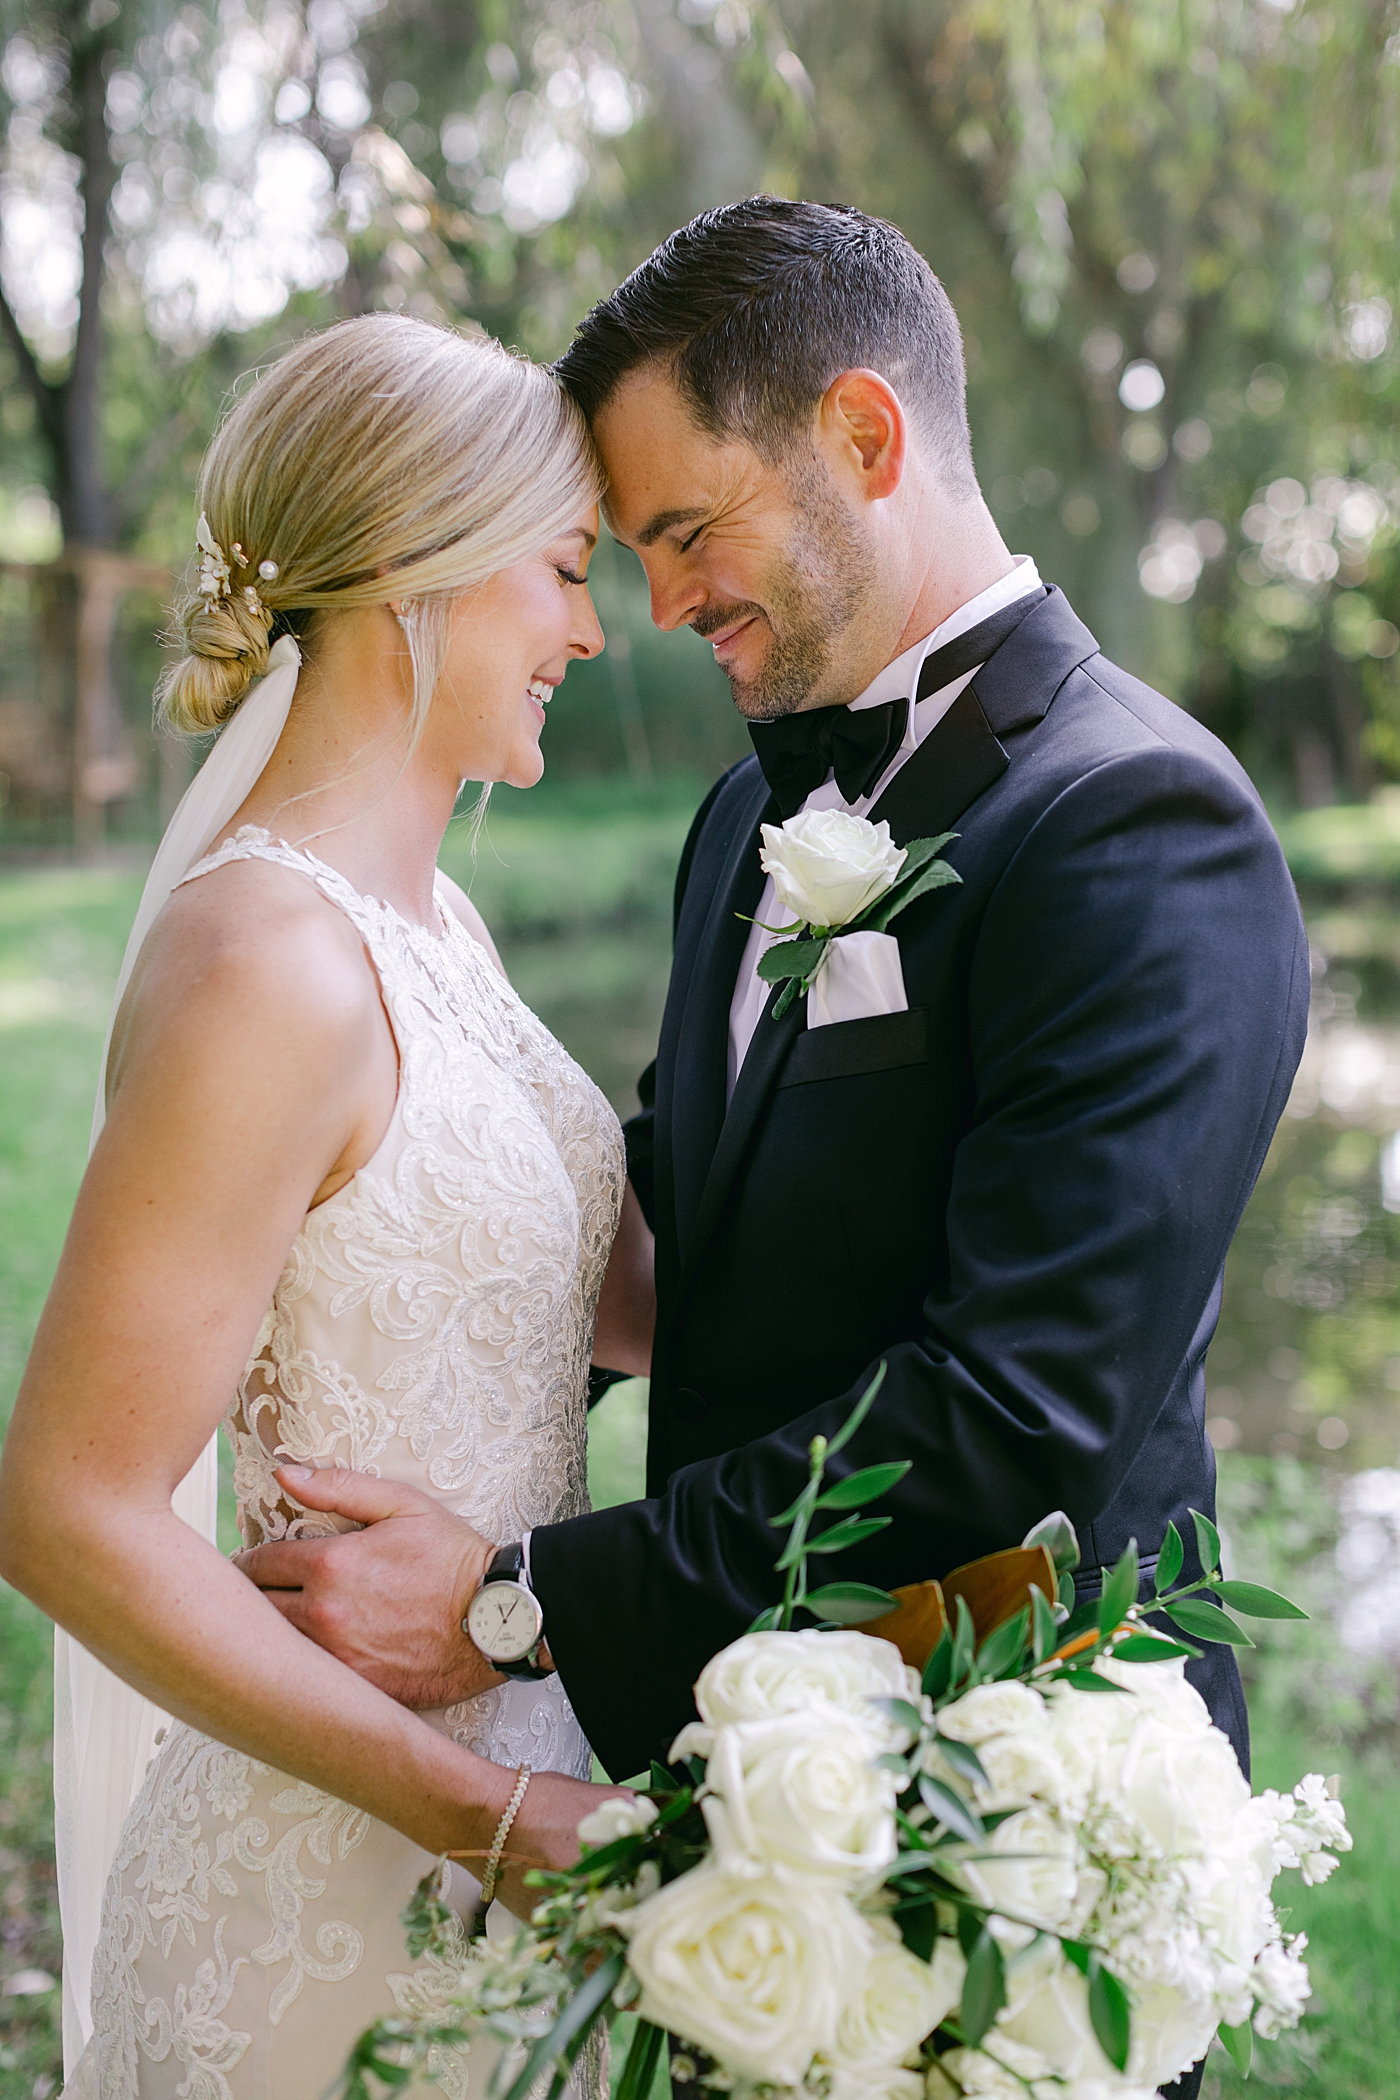 Bride and groom with their foreheads together during Hotel du Village Wedding | Image by Hope Helmuth Photography